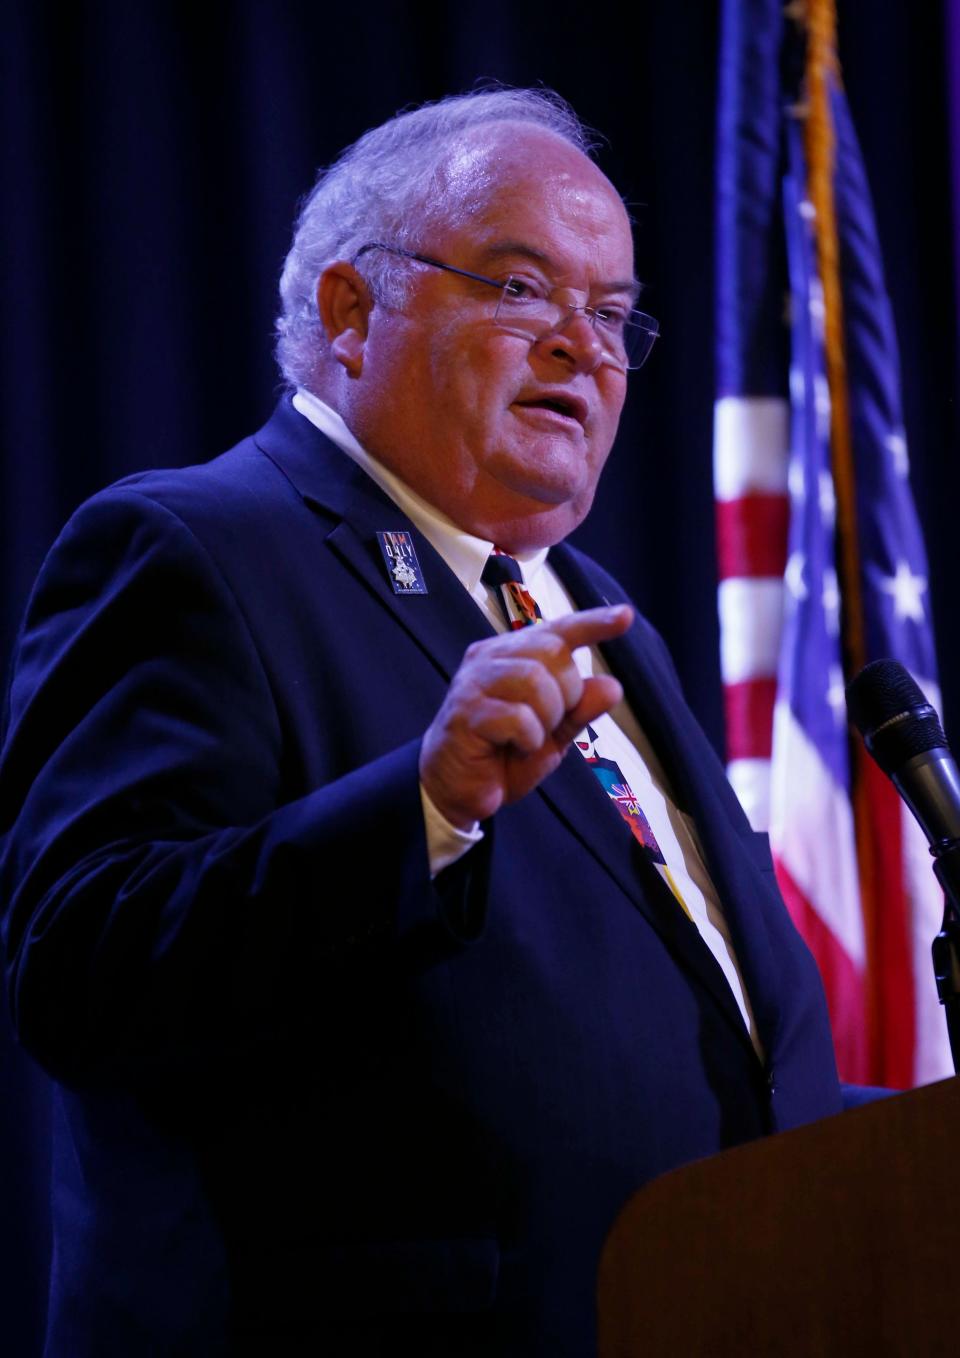 U.S. Rep. Billy Long at the Republican candidate debate for U.S. Senate at the Oasis Convention Center in Springfield on May 31, 2022.